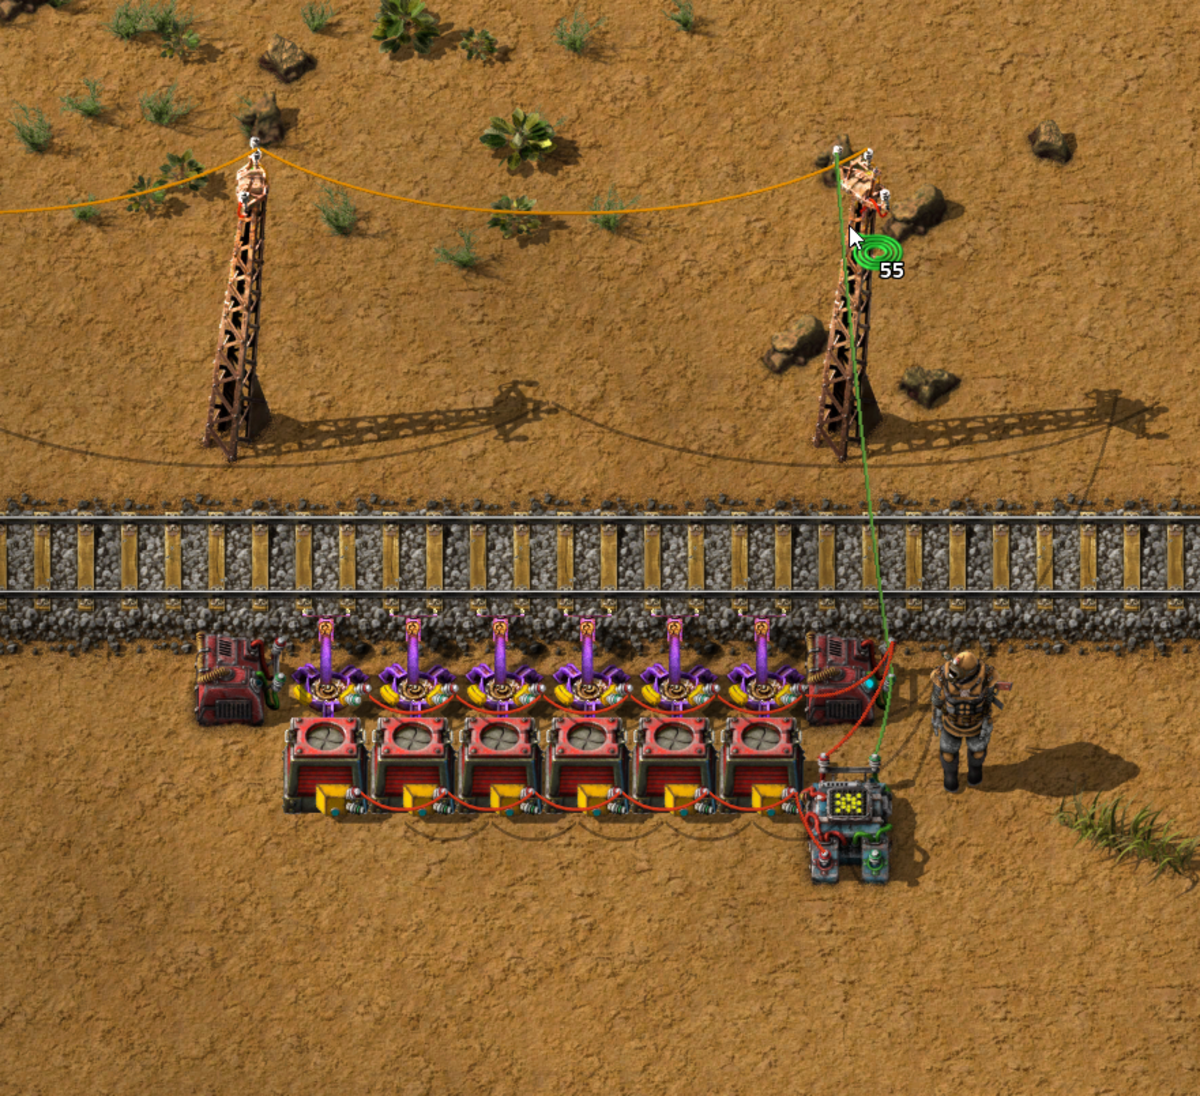 factorio-how-to-build-a-building-train-part-2-of-2